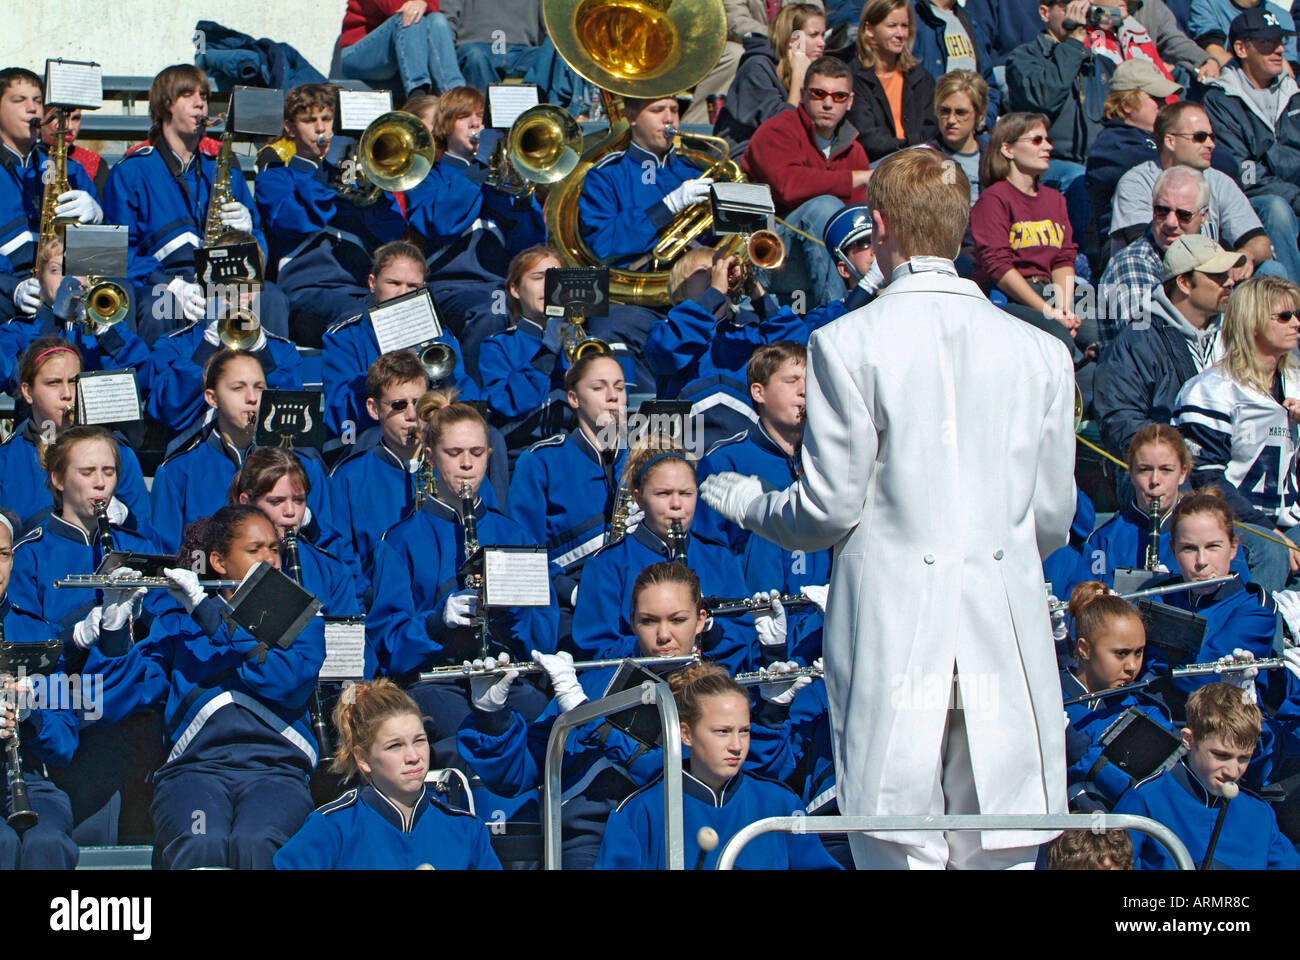 Band Leads High Resolution Stock Photography and Images - Alamy